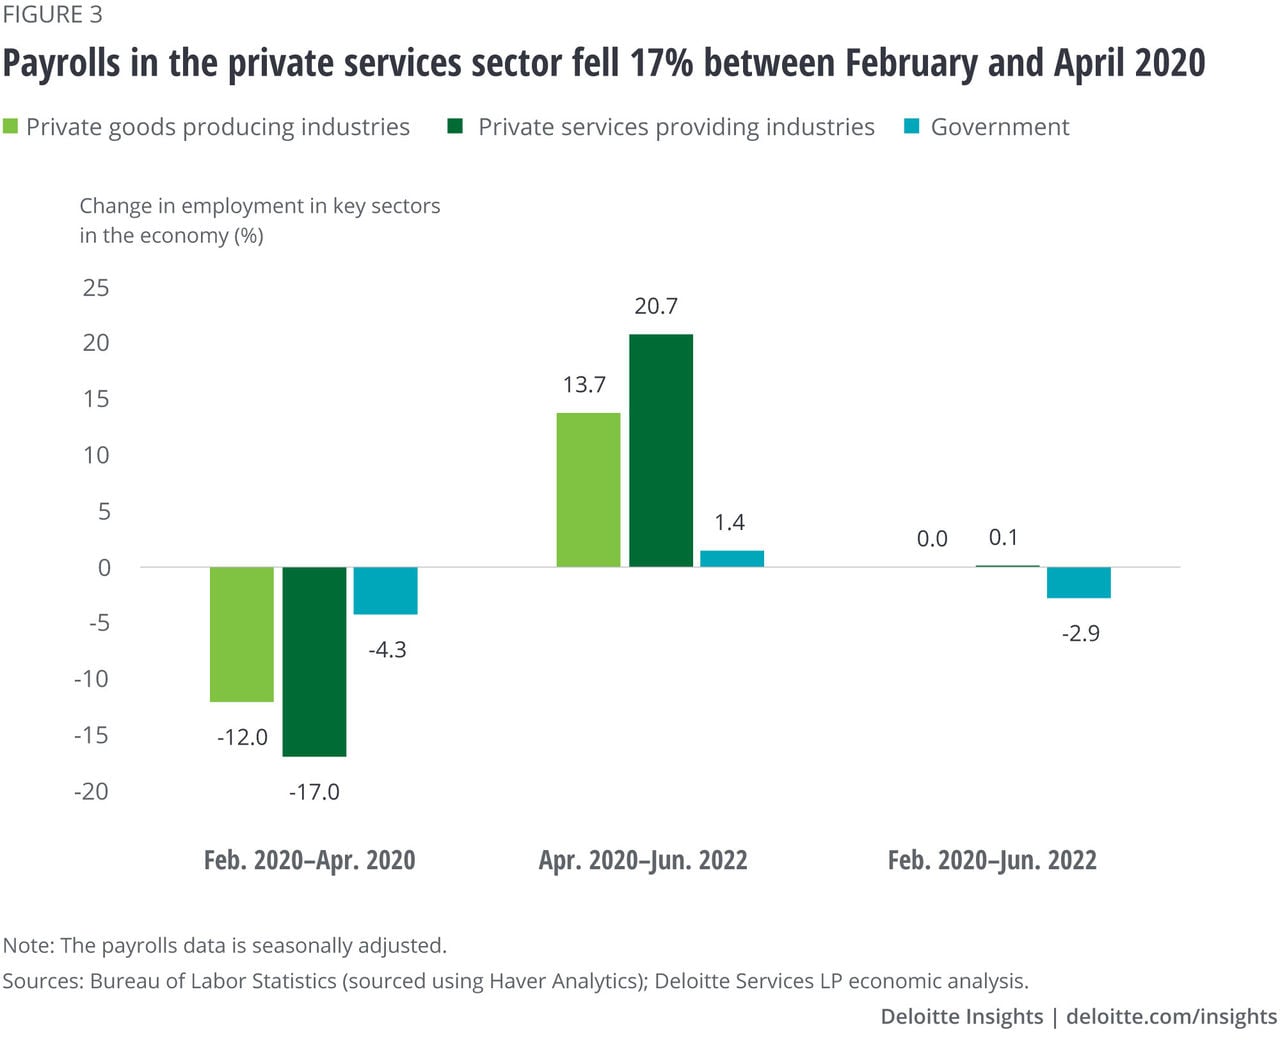 Figure 3. Payrolls in services in the private sector fell 17% between February and April of 2020